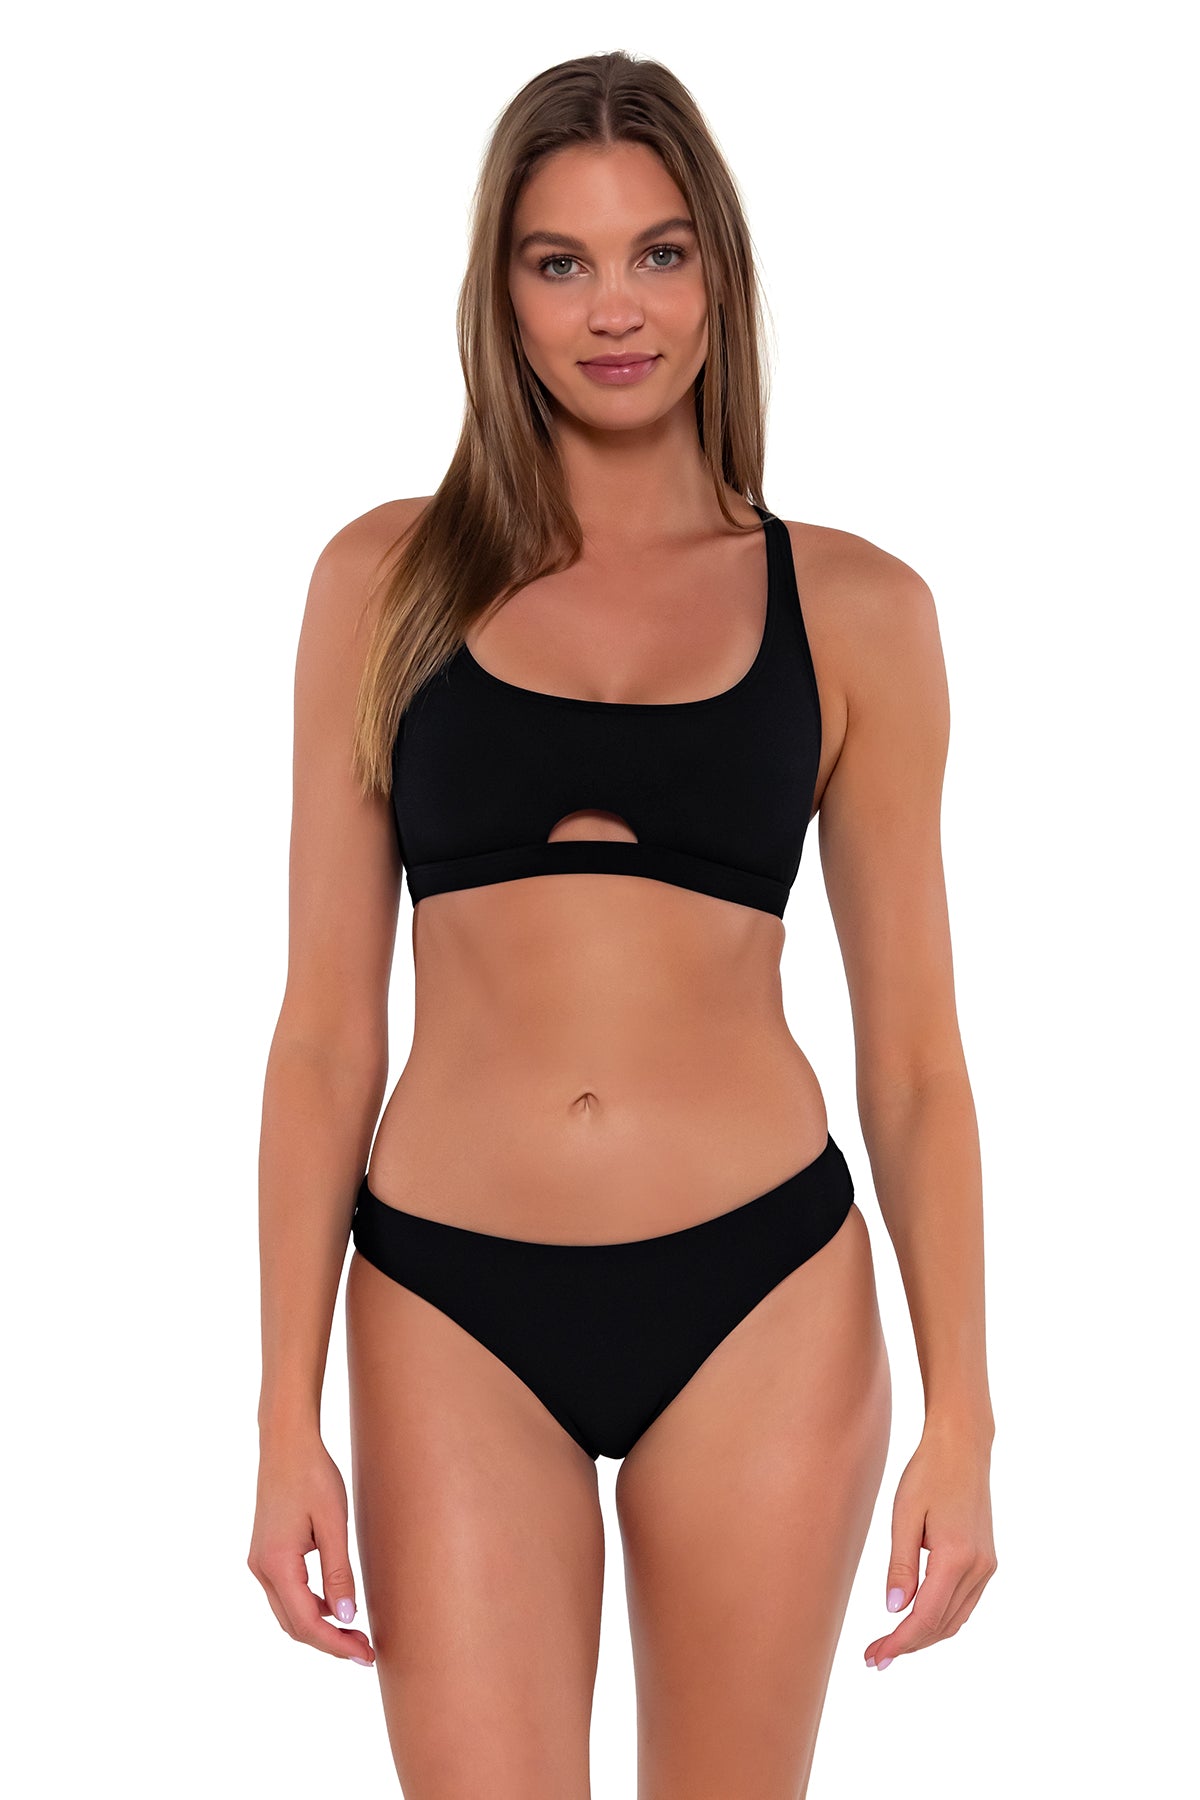 Front Front pose #1 of Daria wearing Sunsets Black Brandi Bralette Top with matching Collins Hipster bikini bottom